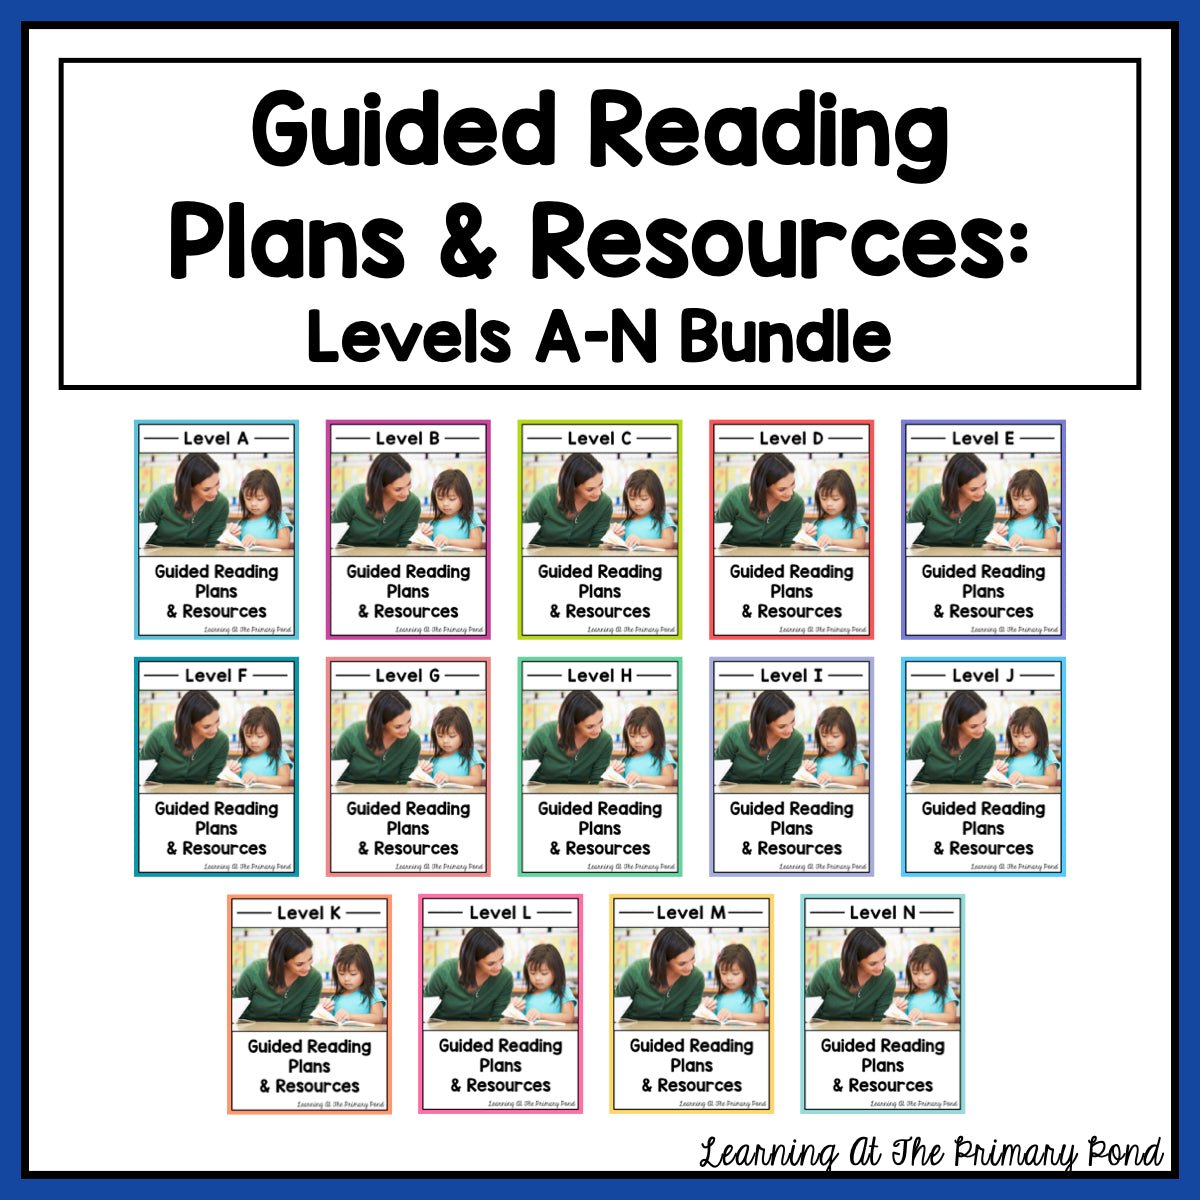 Guided Reading Activities and Lesson Plans - Levels A Through N BUNDLE - learning-at-the-primary-pond